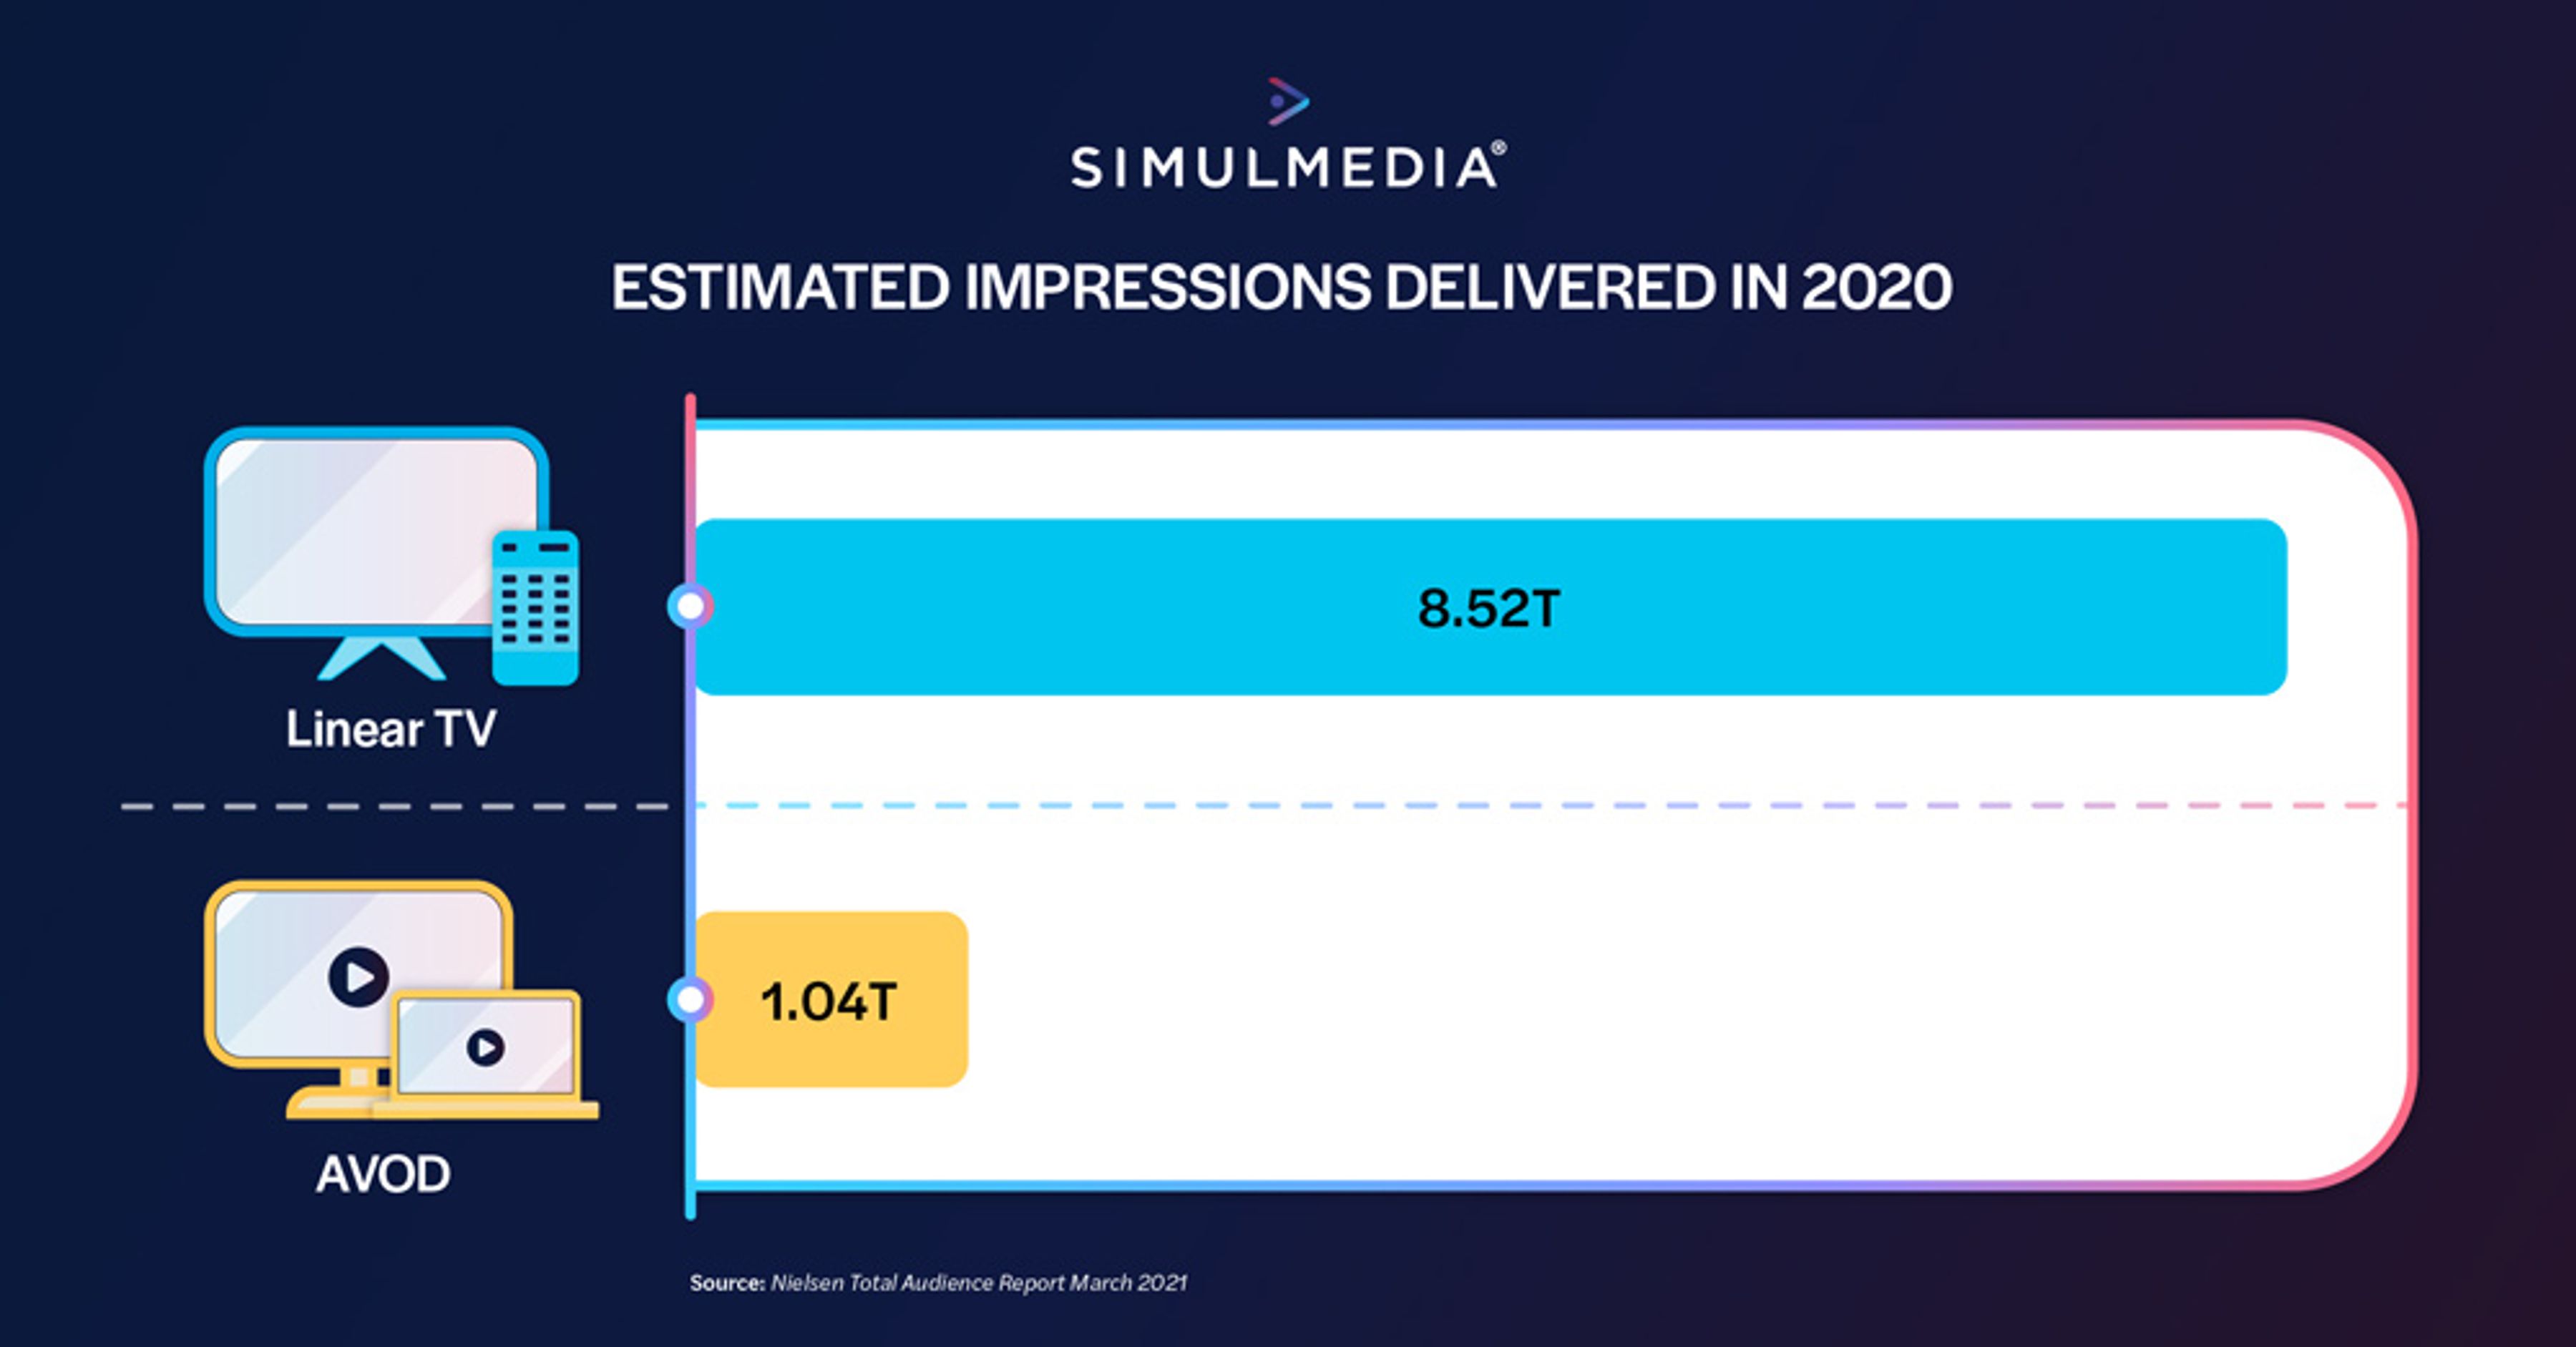 Estimated impressions delivered in 2020 on linear TV (8.52 trillion) and AVOD (1.04 trillion)